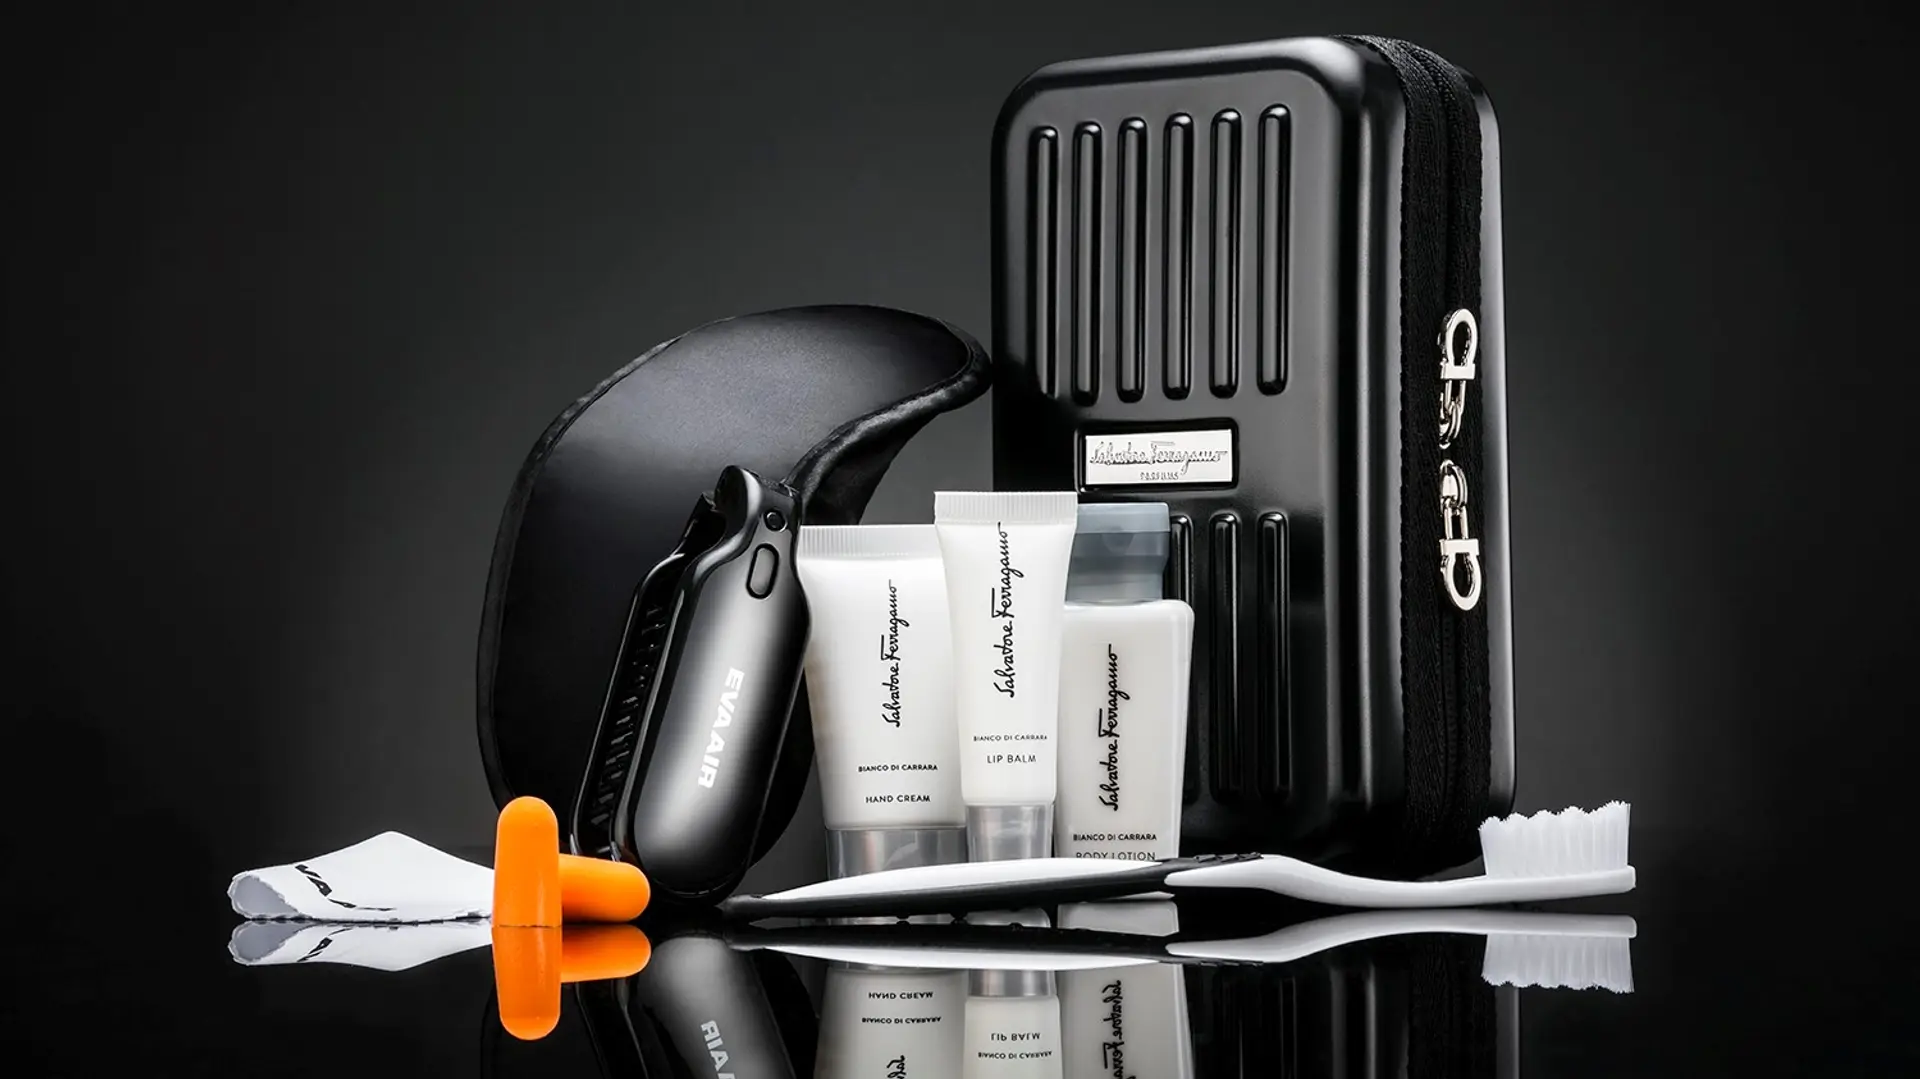 Airlines Articles - Five of the Best Amenity Kits in Business Class